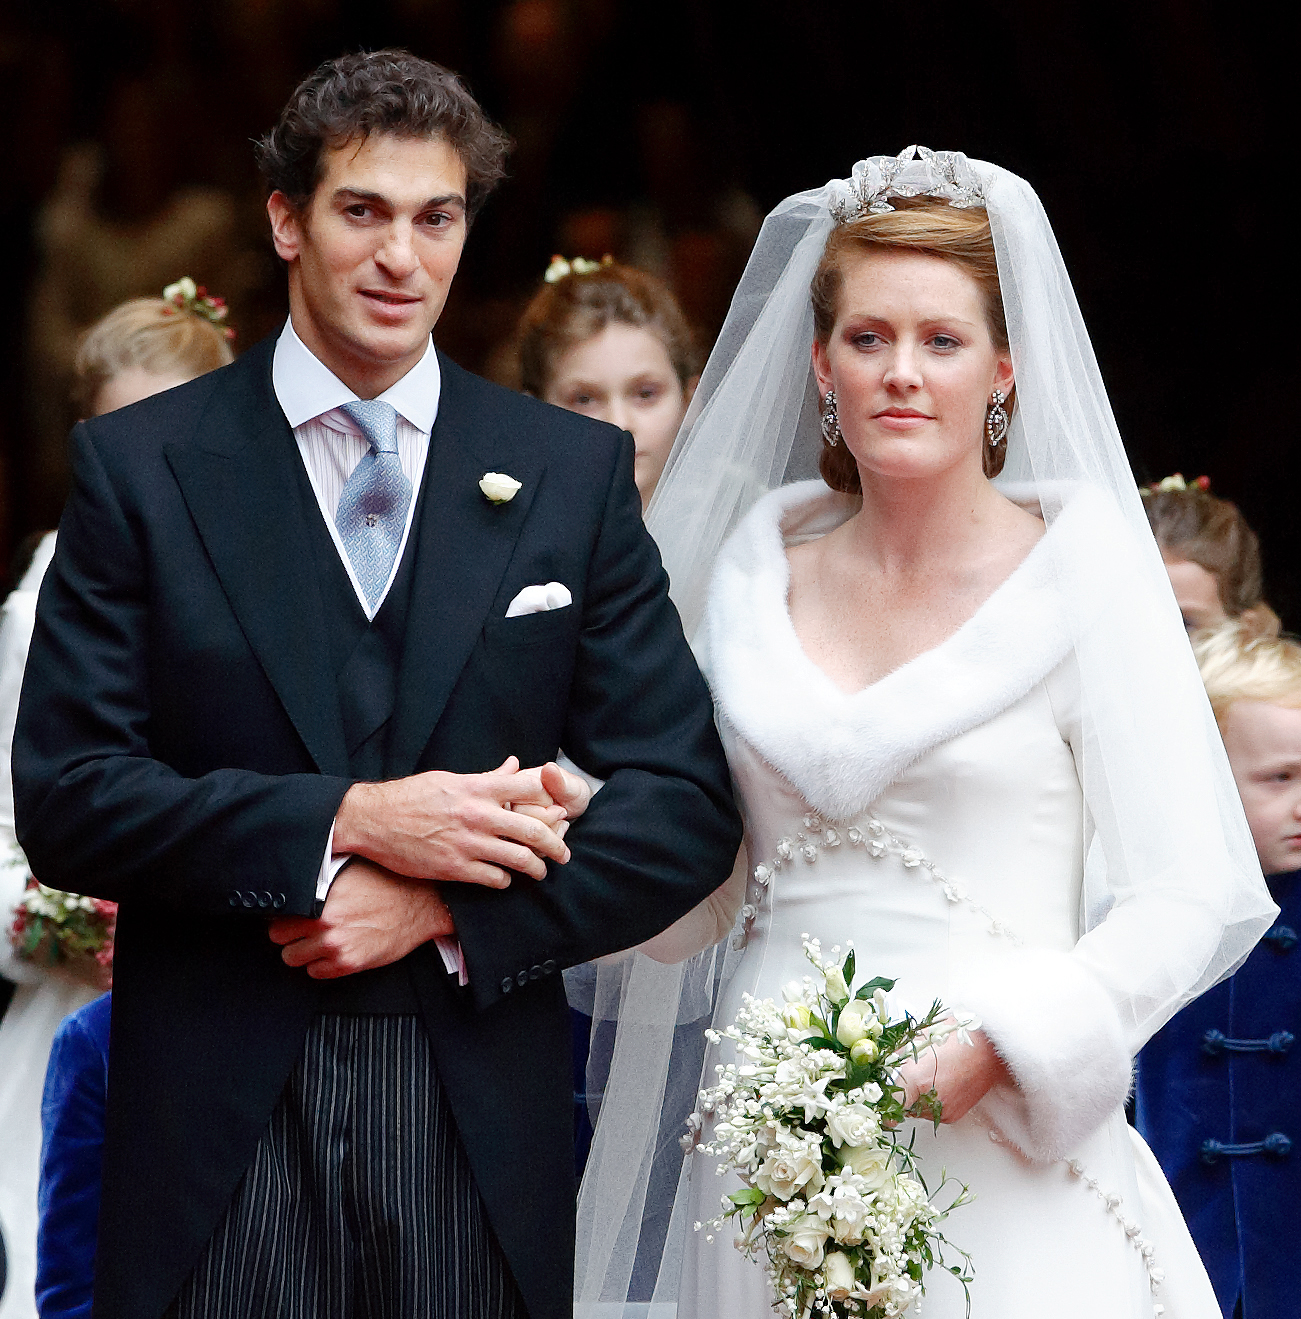 Lady Tamara Grosvenor and Edward van Cutsem on their wedding day in Chester, England on November 6, 2004 | Source: Getty Images